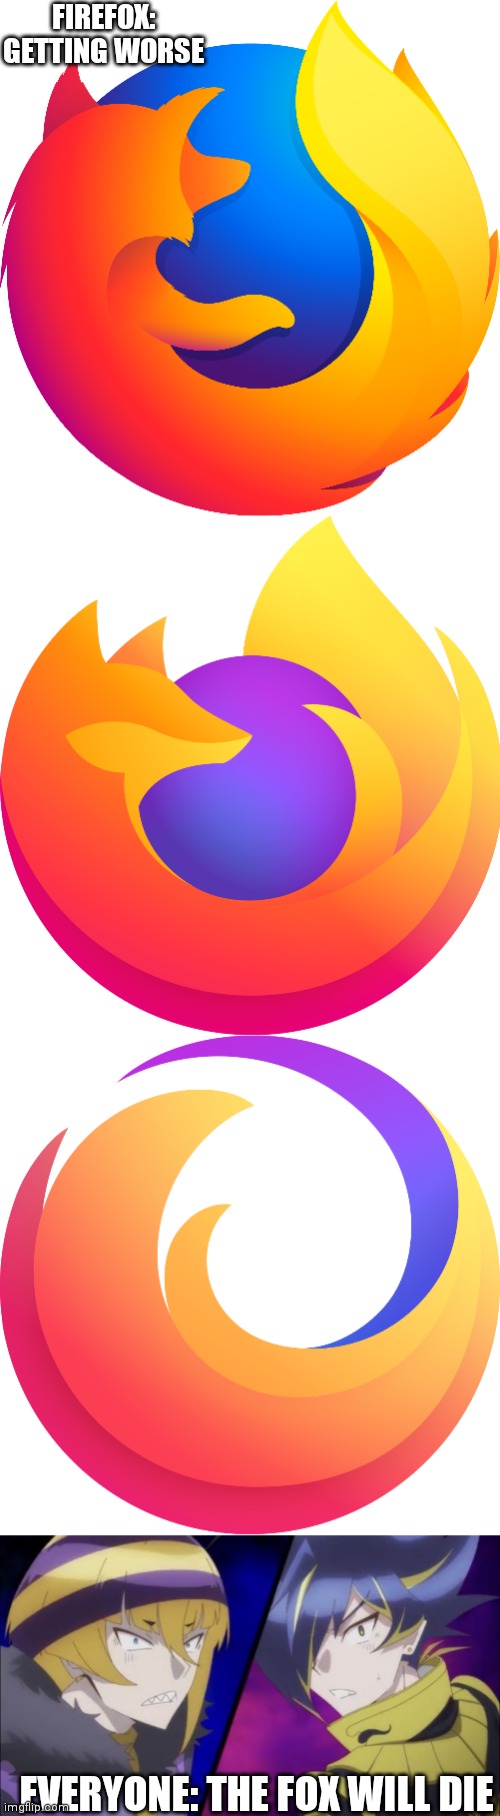 firefox getting worse | FIREFOX: GETTING WORSE; EVERYONE: THE FOX WILL DIE | image tagged in firefox,evolution | made w/ Imgflip meme maker